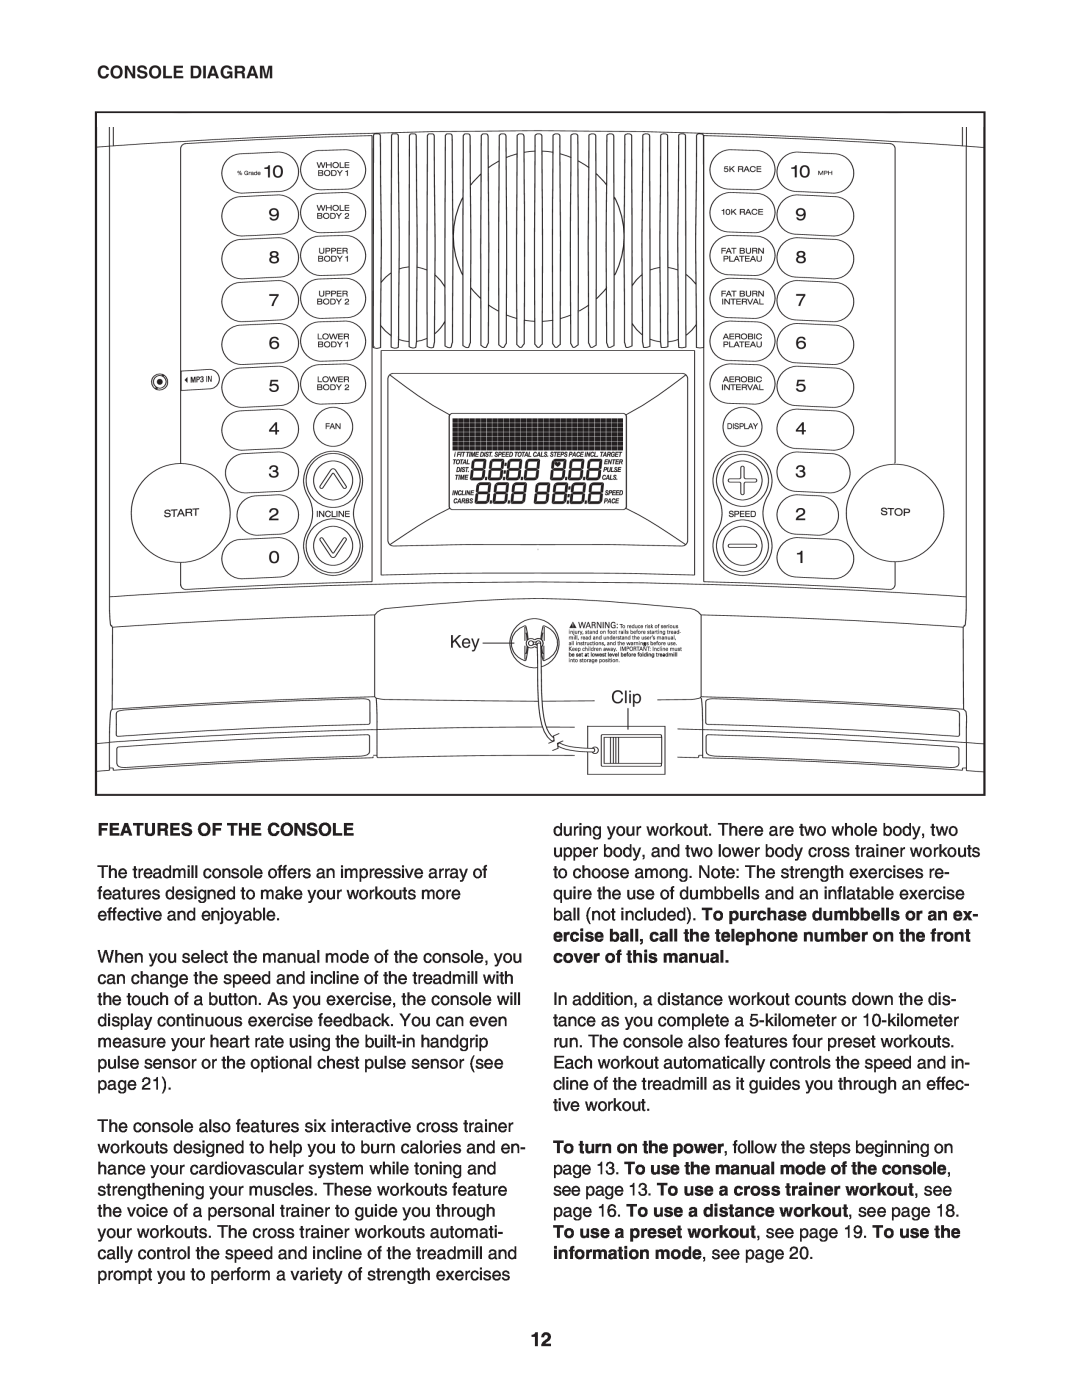 Gold's Gym CWTL05607 manual Console Diagram, Features Of The Console 